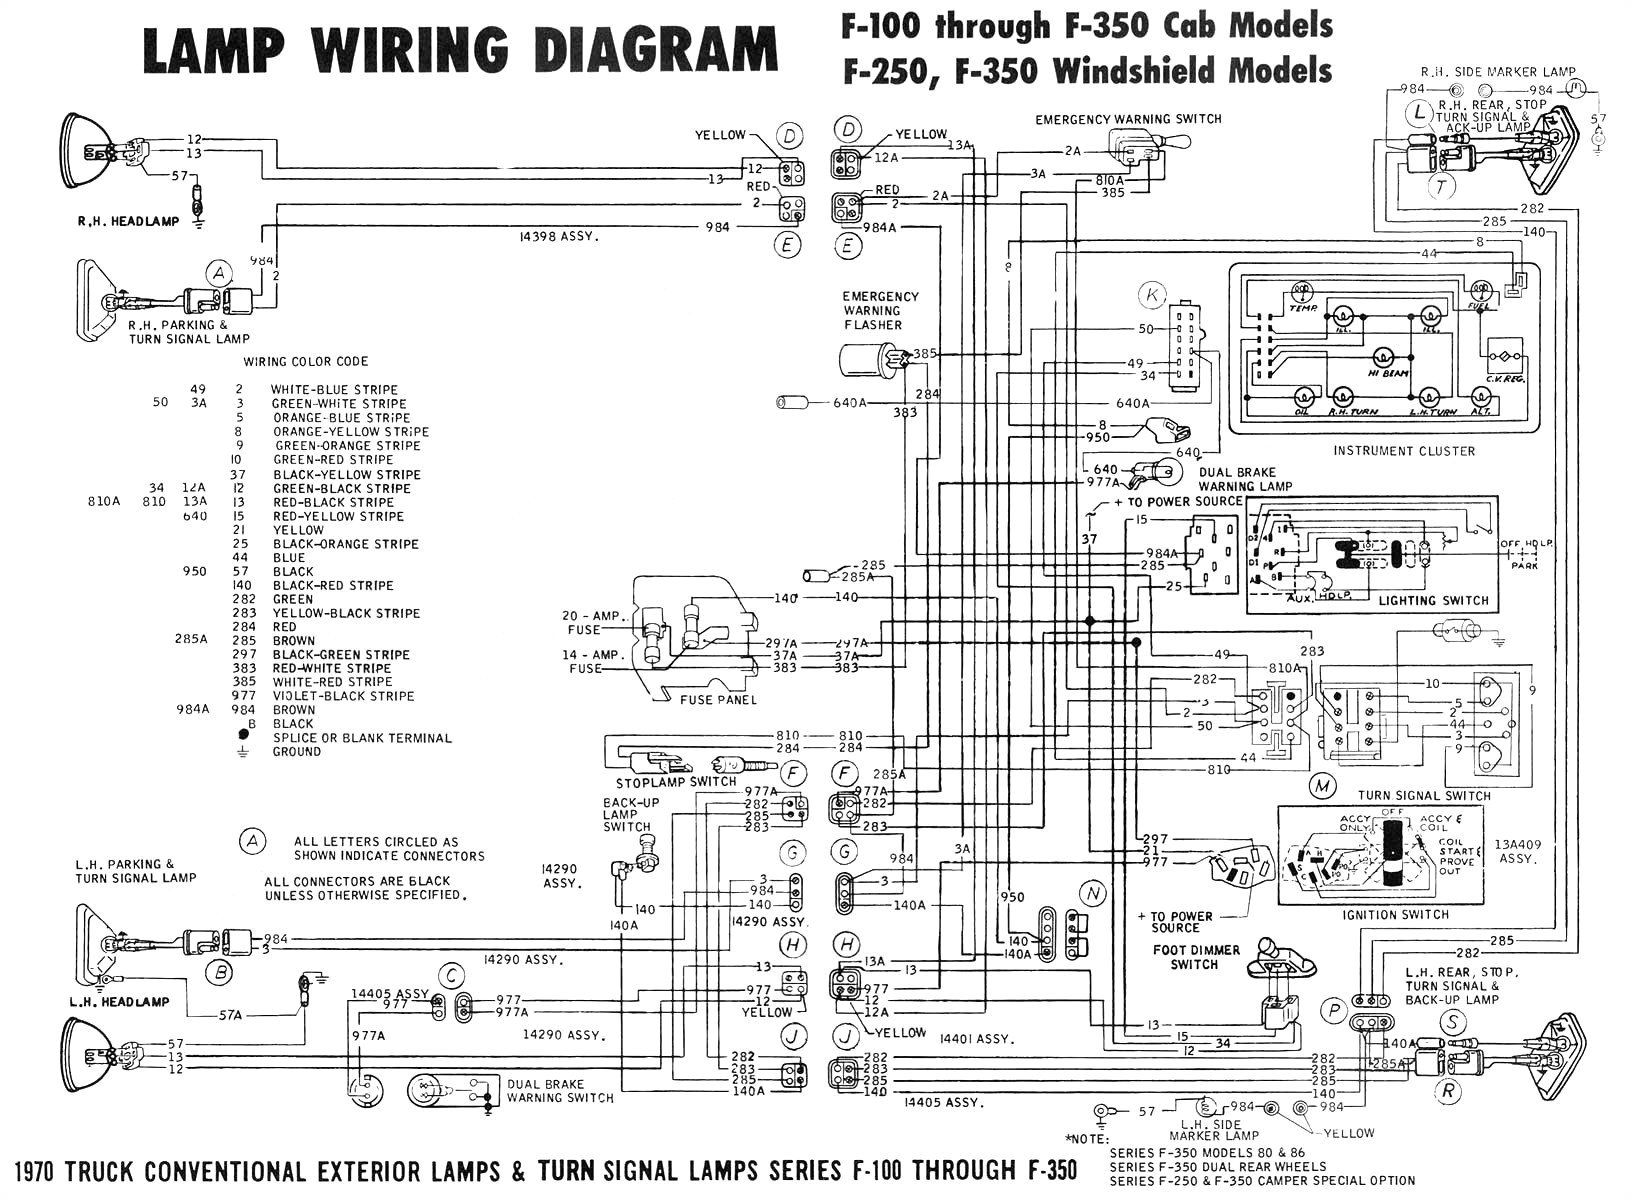 1967 ford c6 wiring diagram wiring diagram fascinating 1967 mustang ignition switch wiring lzk gallery wiring